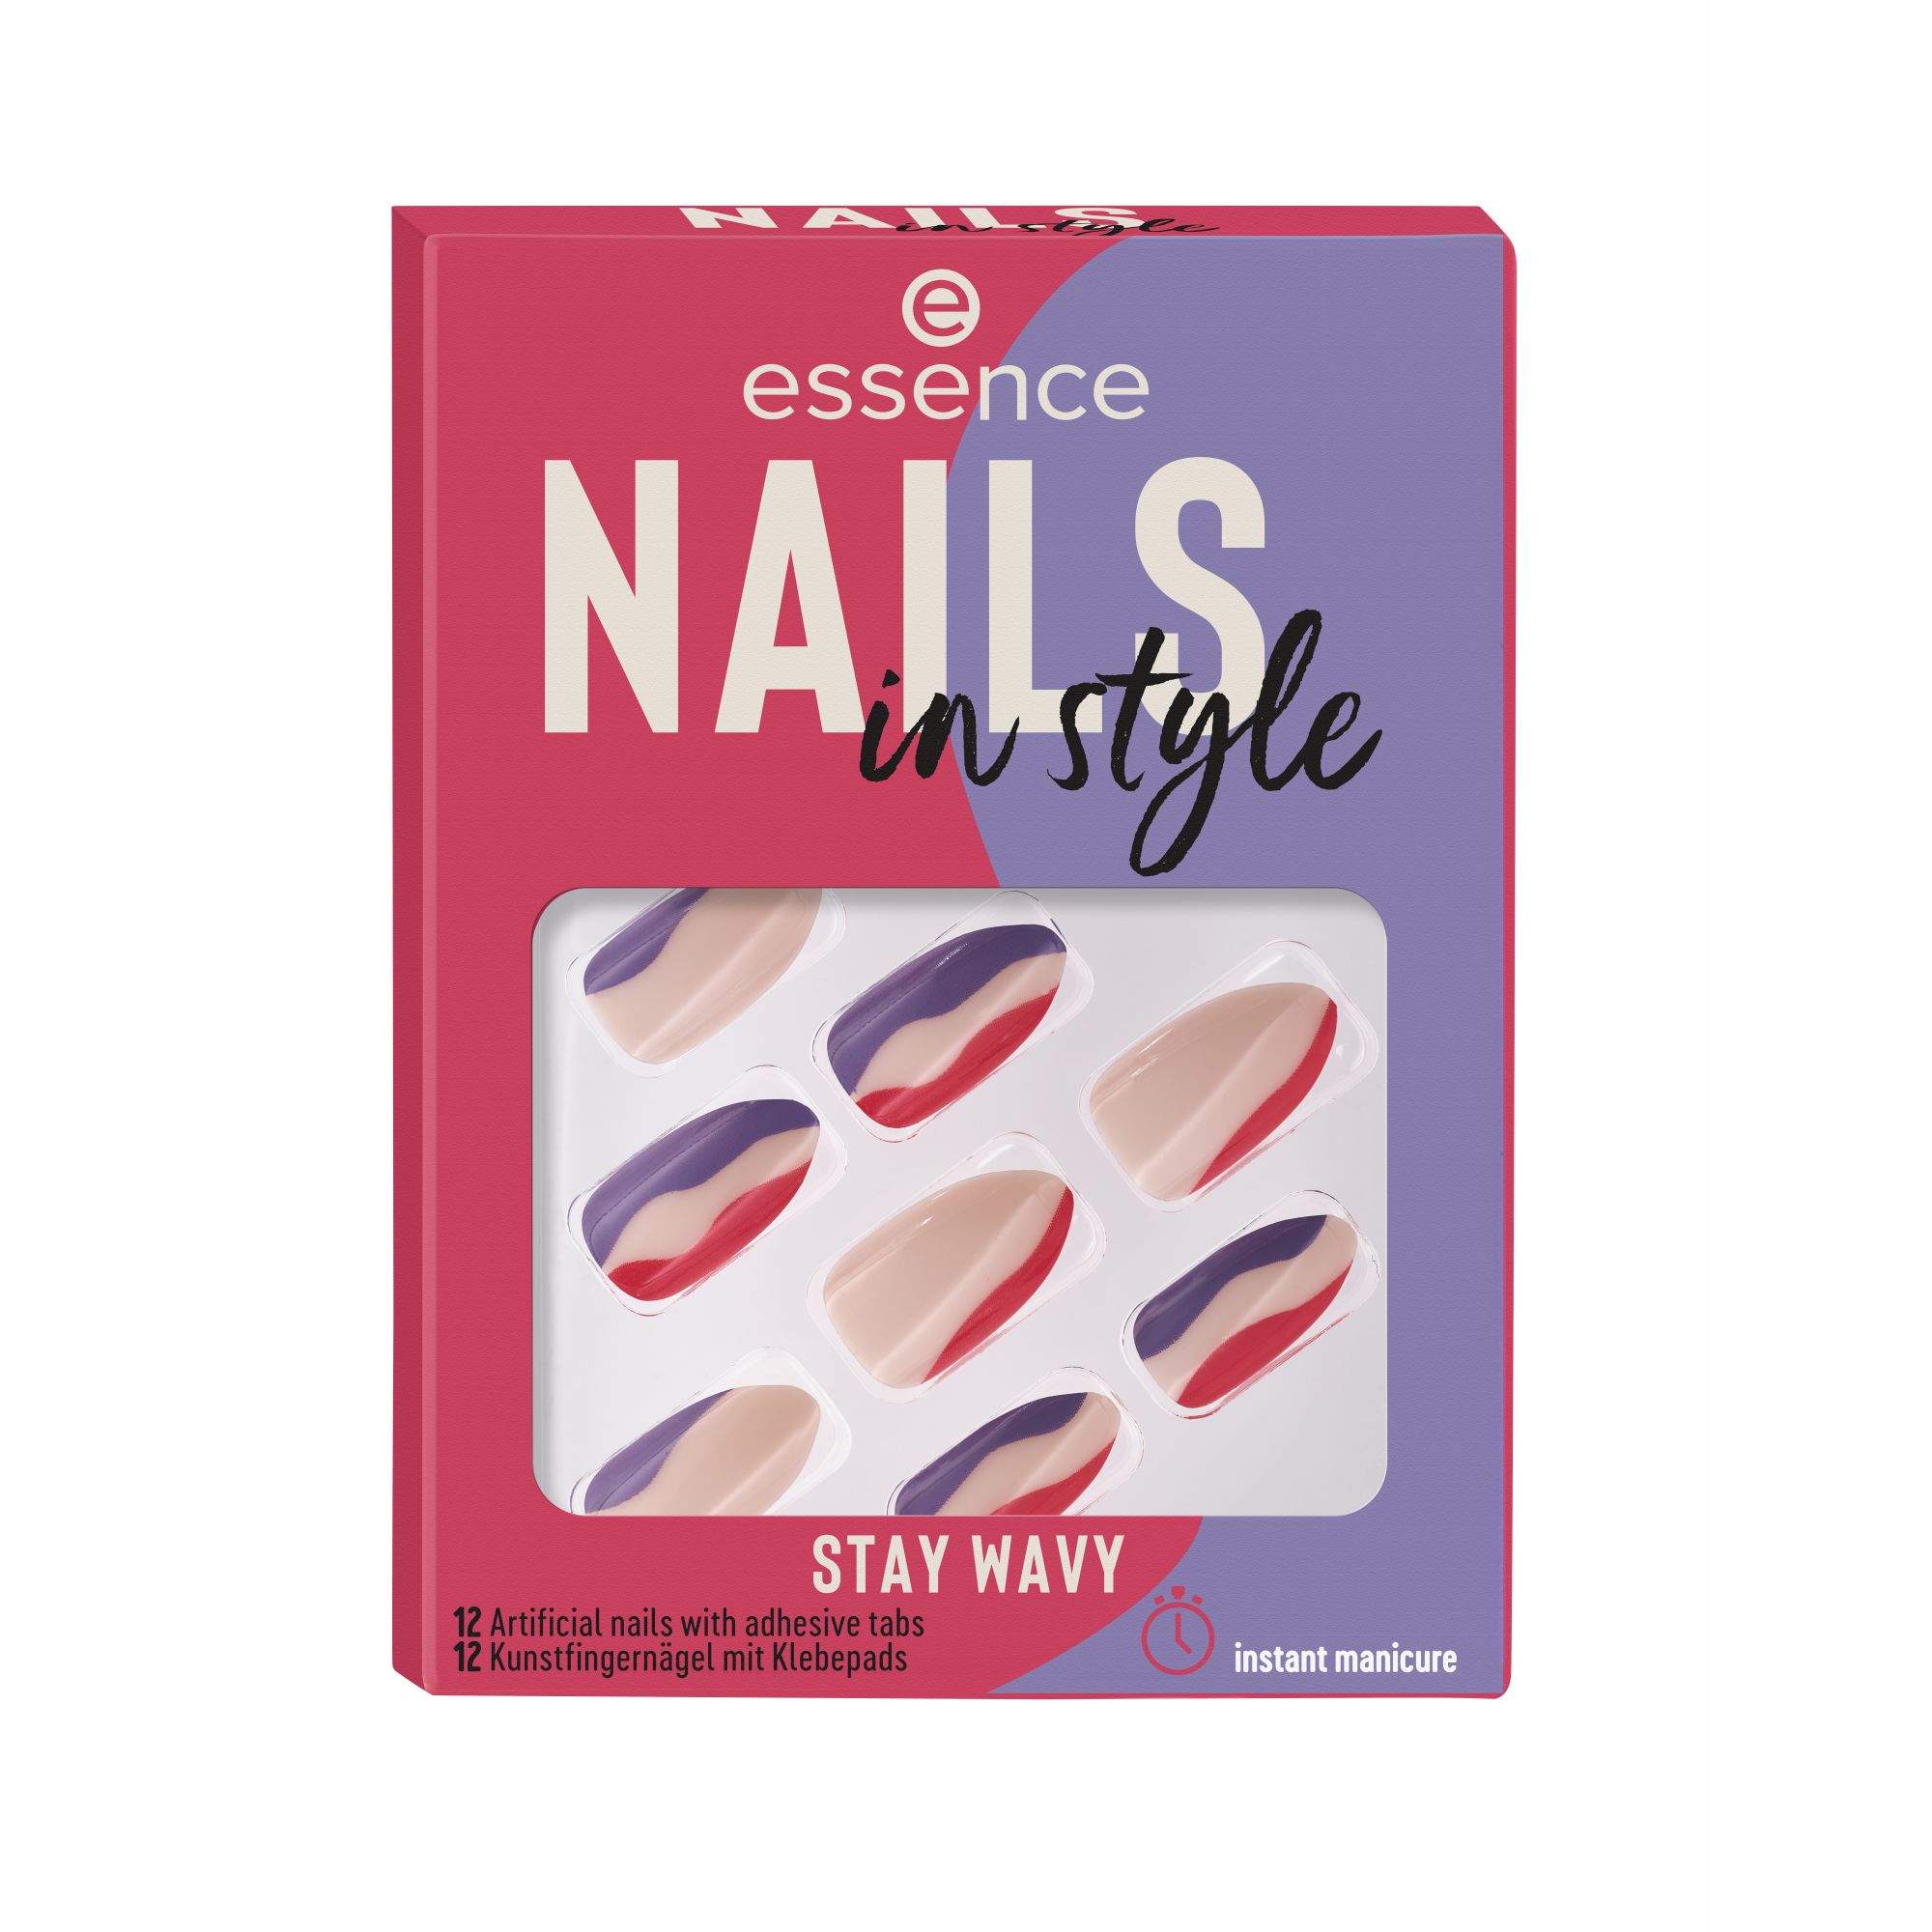 False Nails - Nails In Style (12 Pieces)